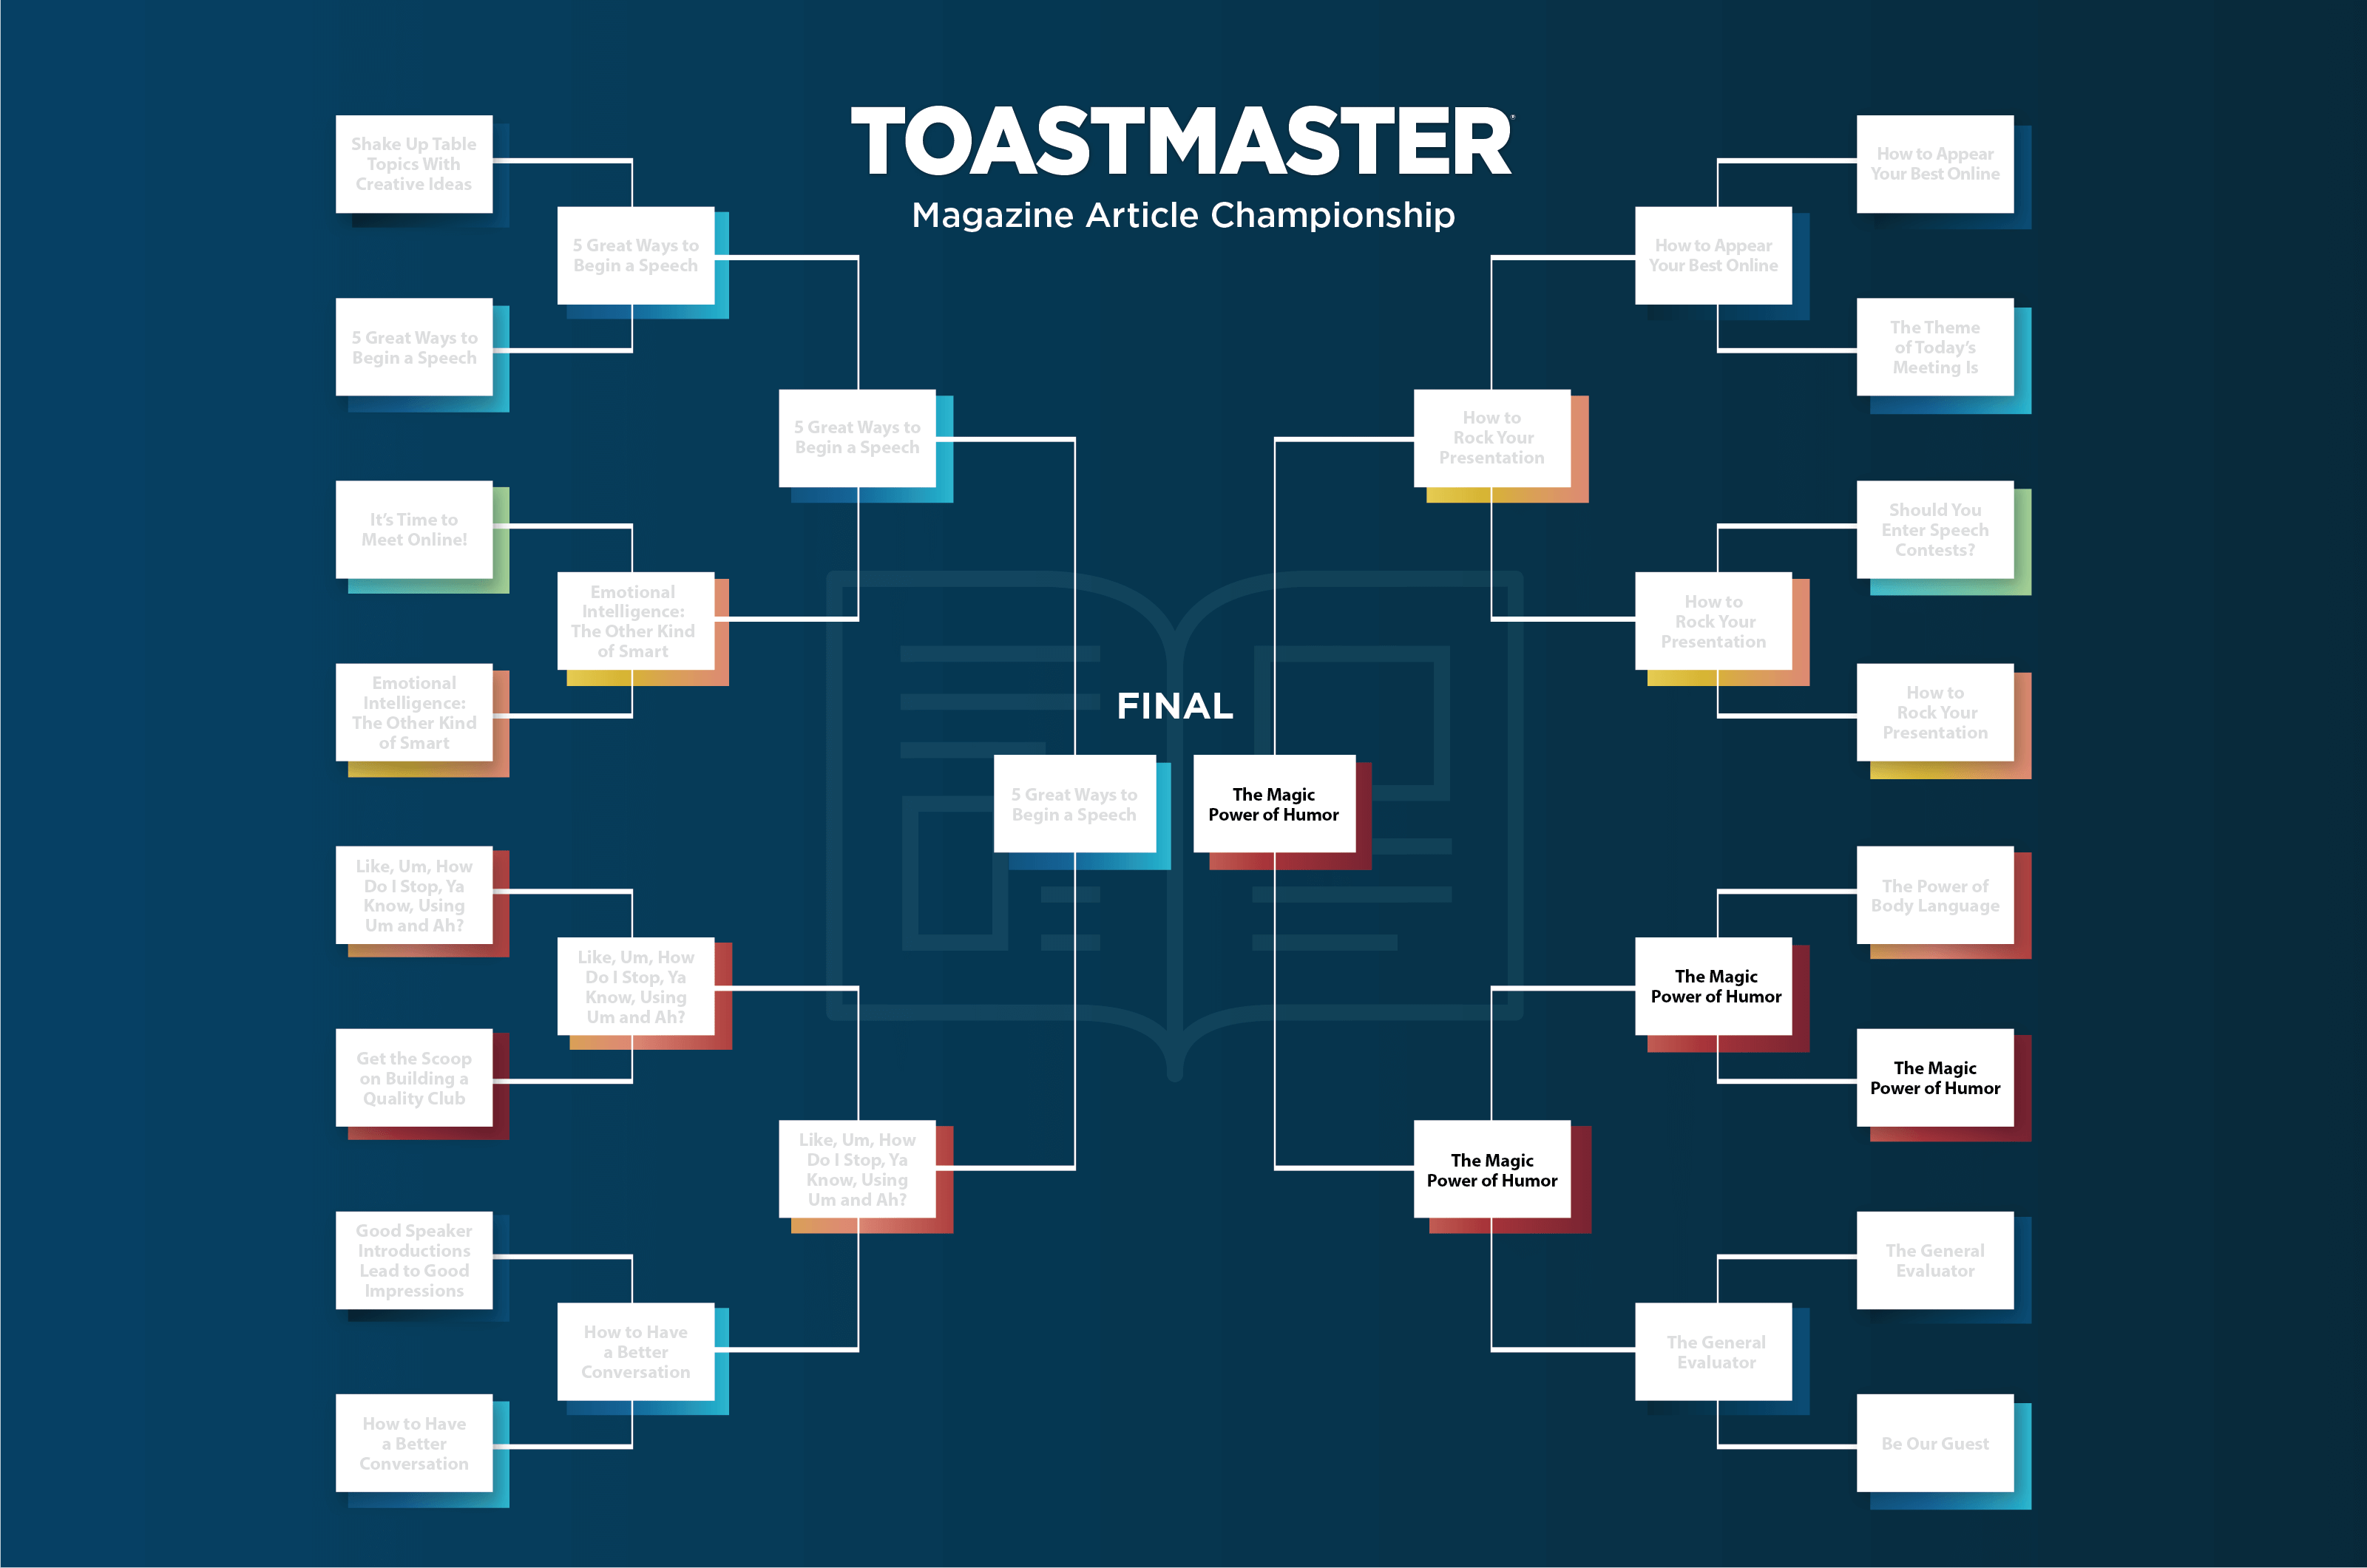 Brackets with Toastmaster magazine articles final round